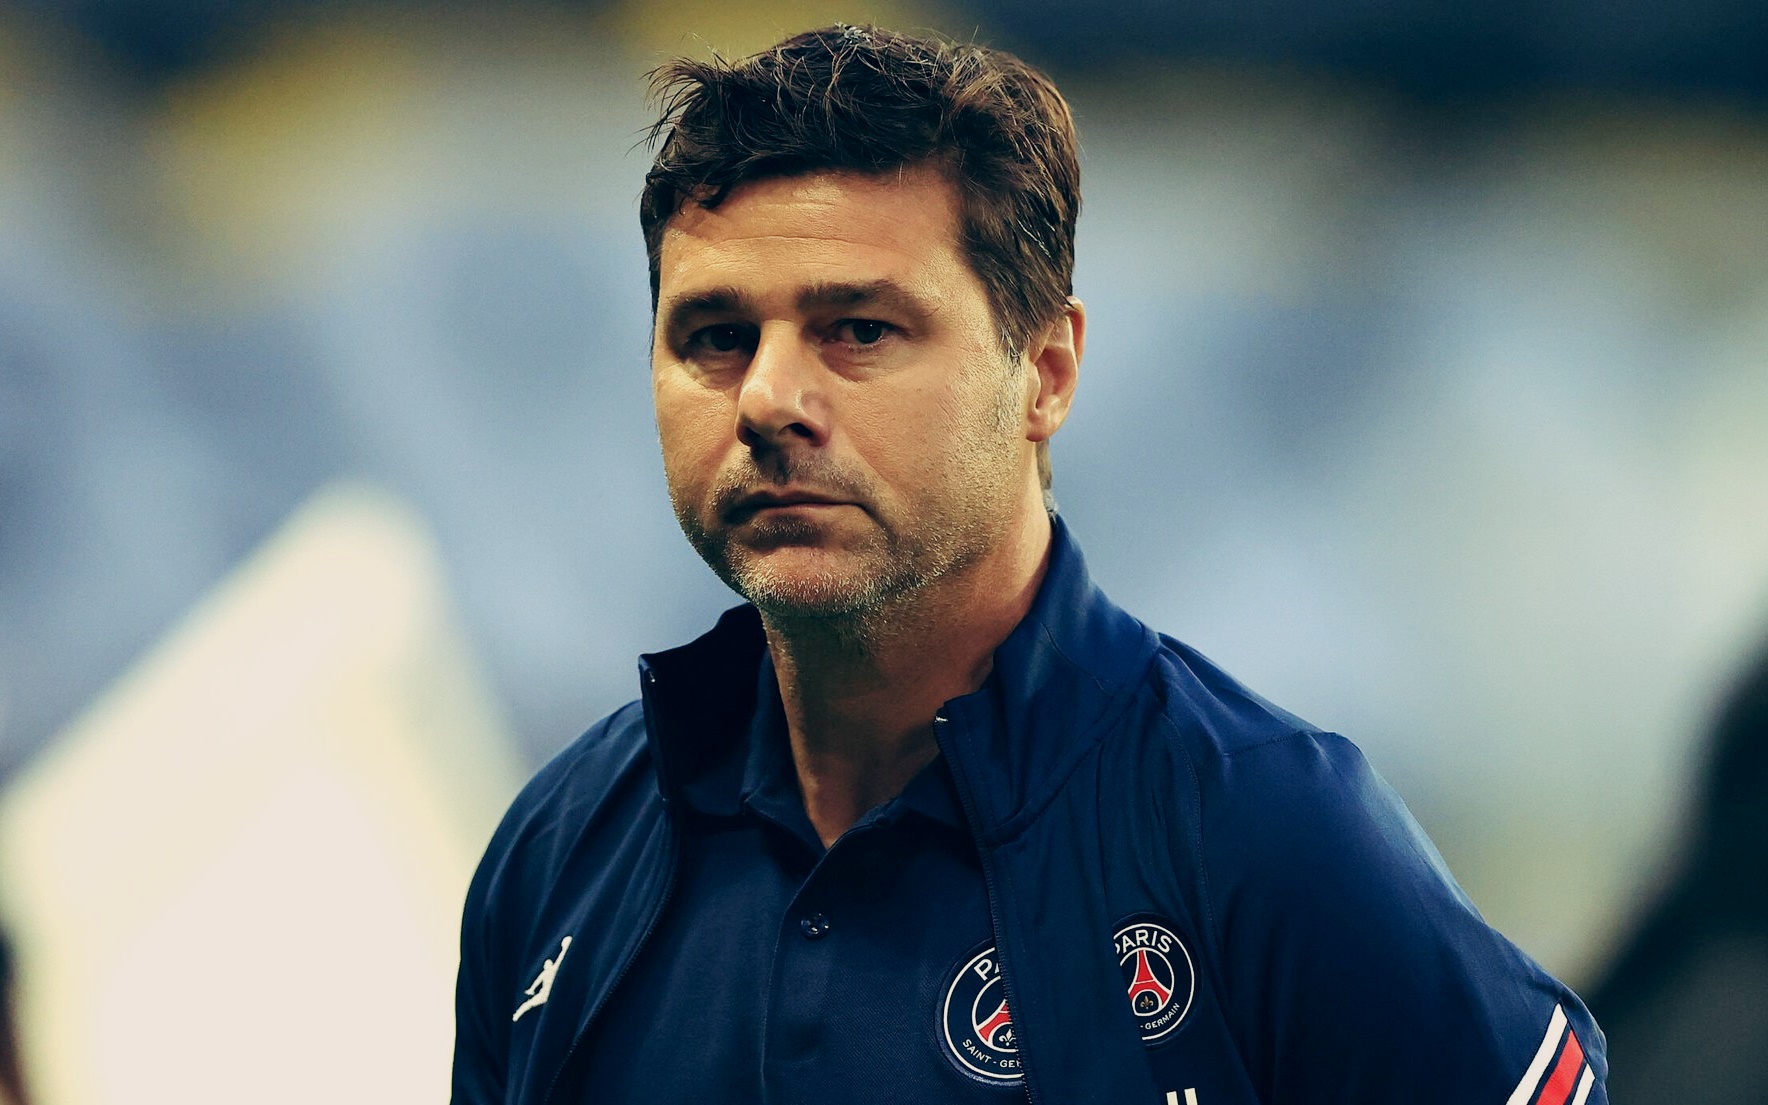 Pochettino: “I’m under contract until June 2023 and I want to continue here”. - Bóng Đá